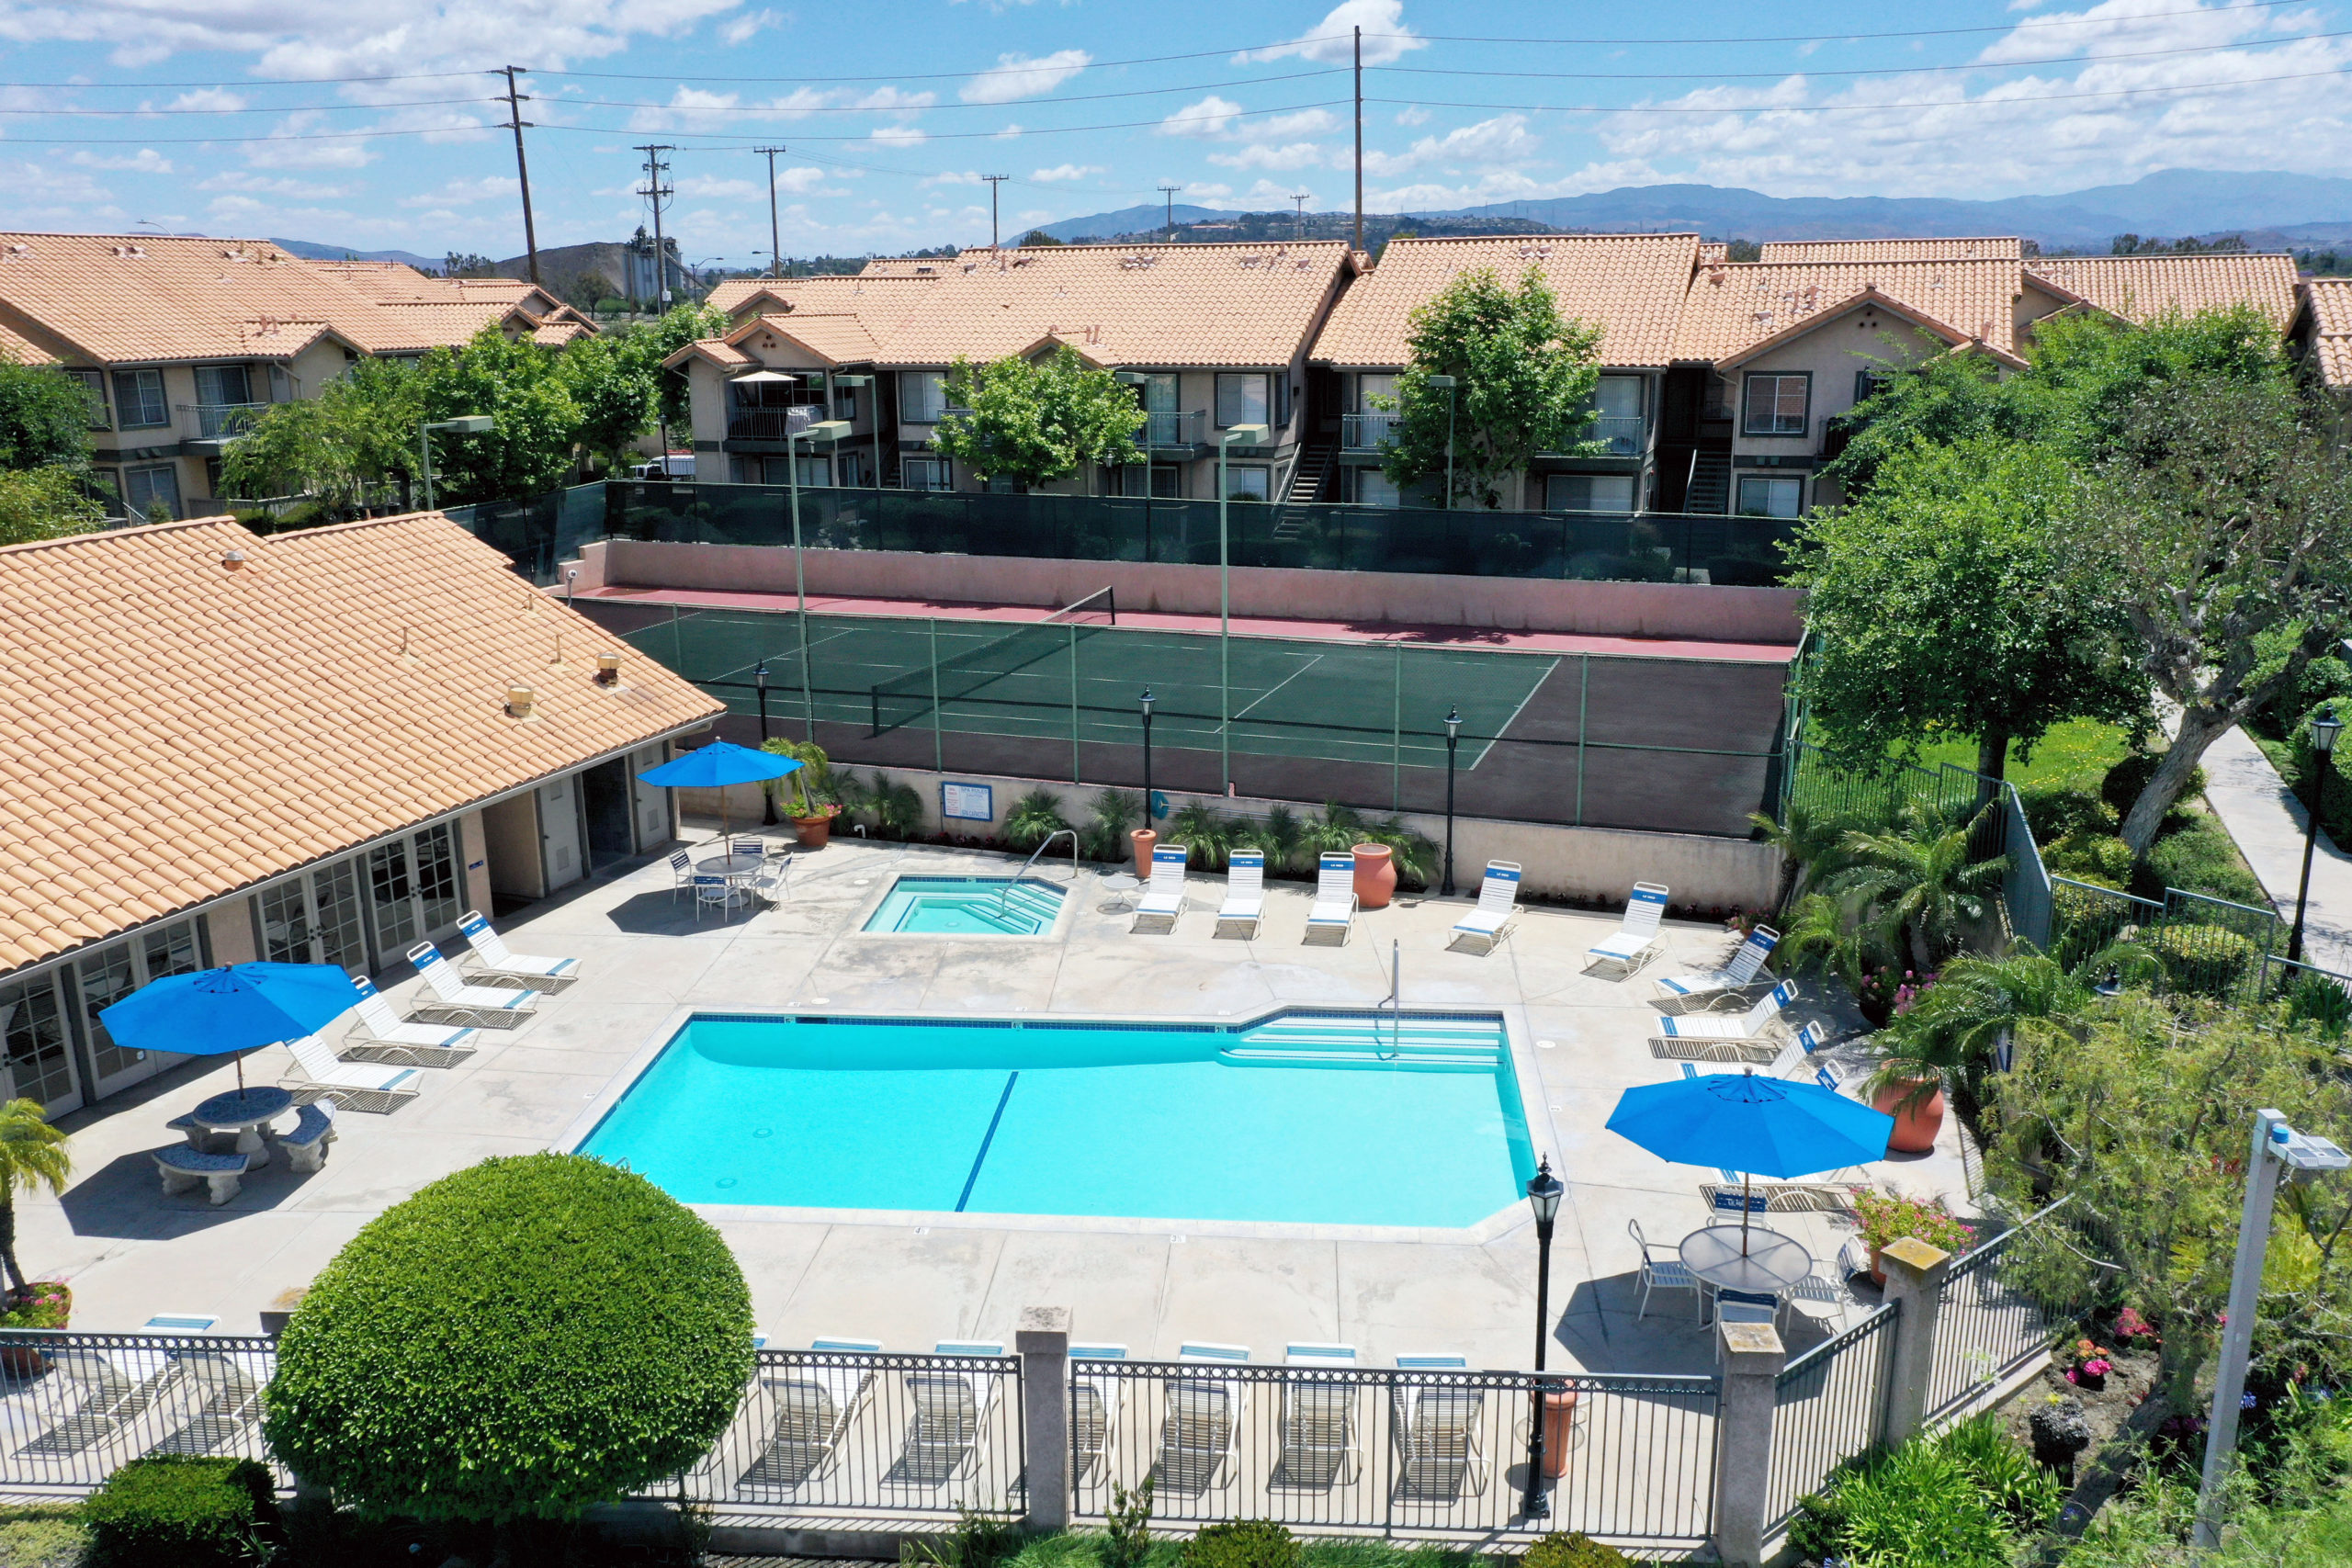 Apartments in Anaheim for Rent - Le Med - Swimming Pool Surrounded by Lounge Chairs, Covered Seating Areas, and Lush Landscaping